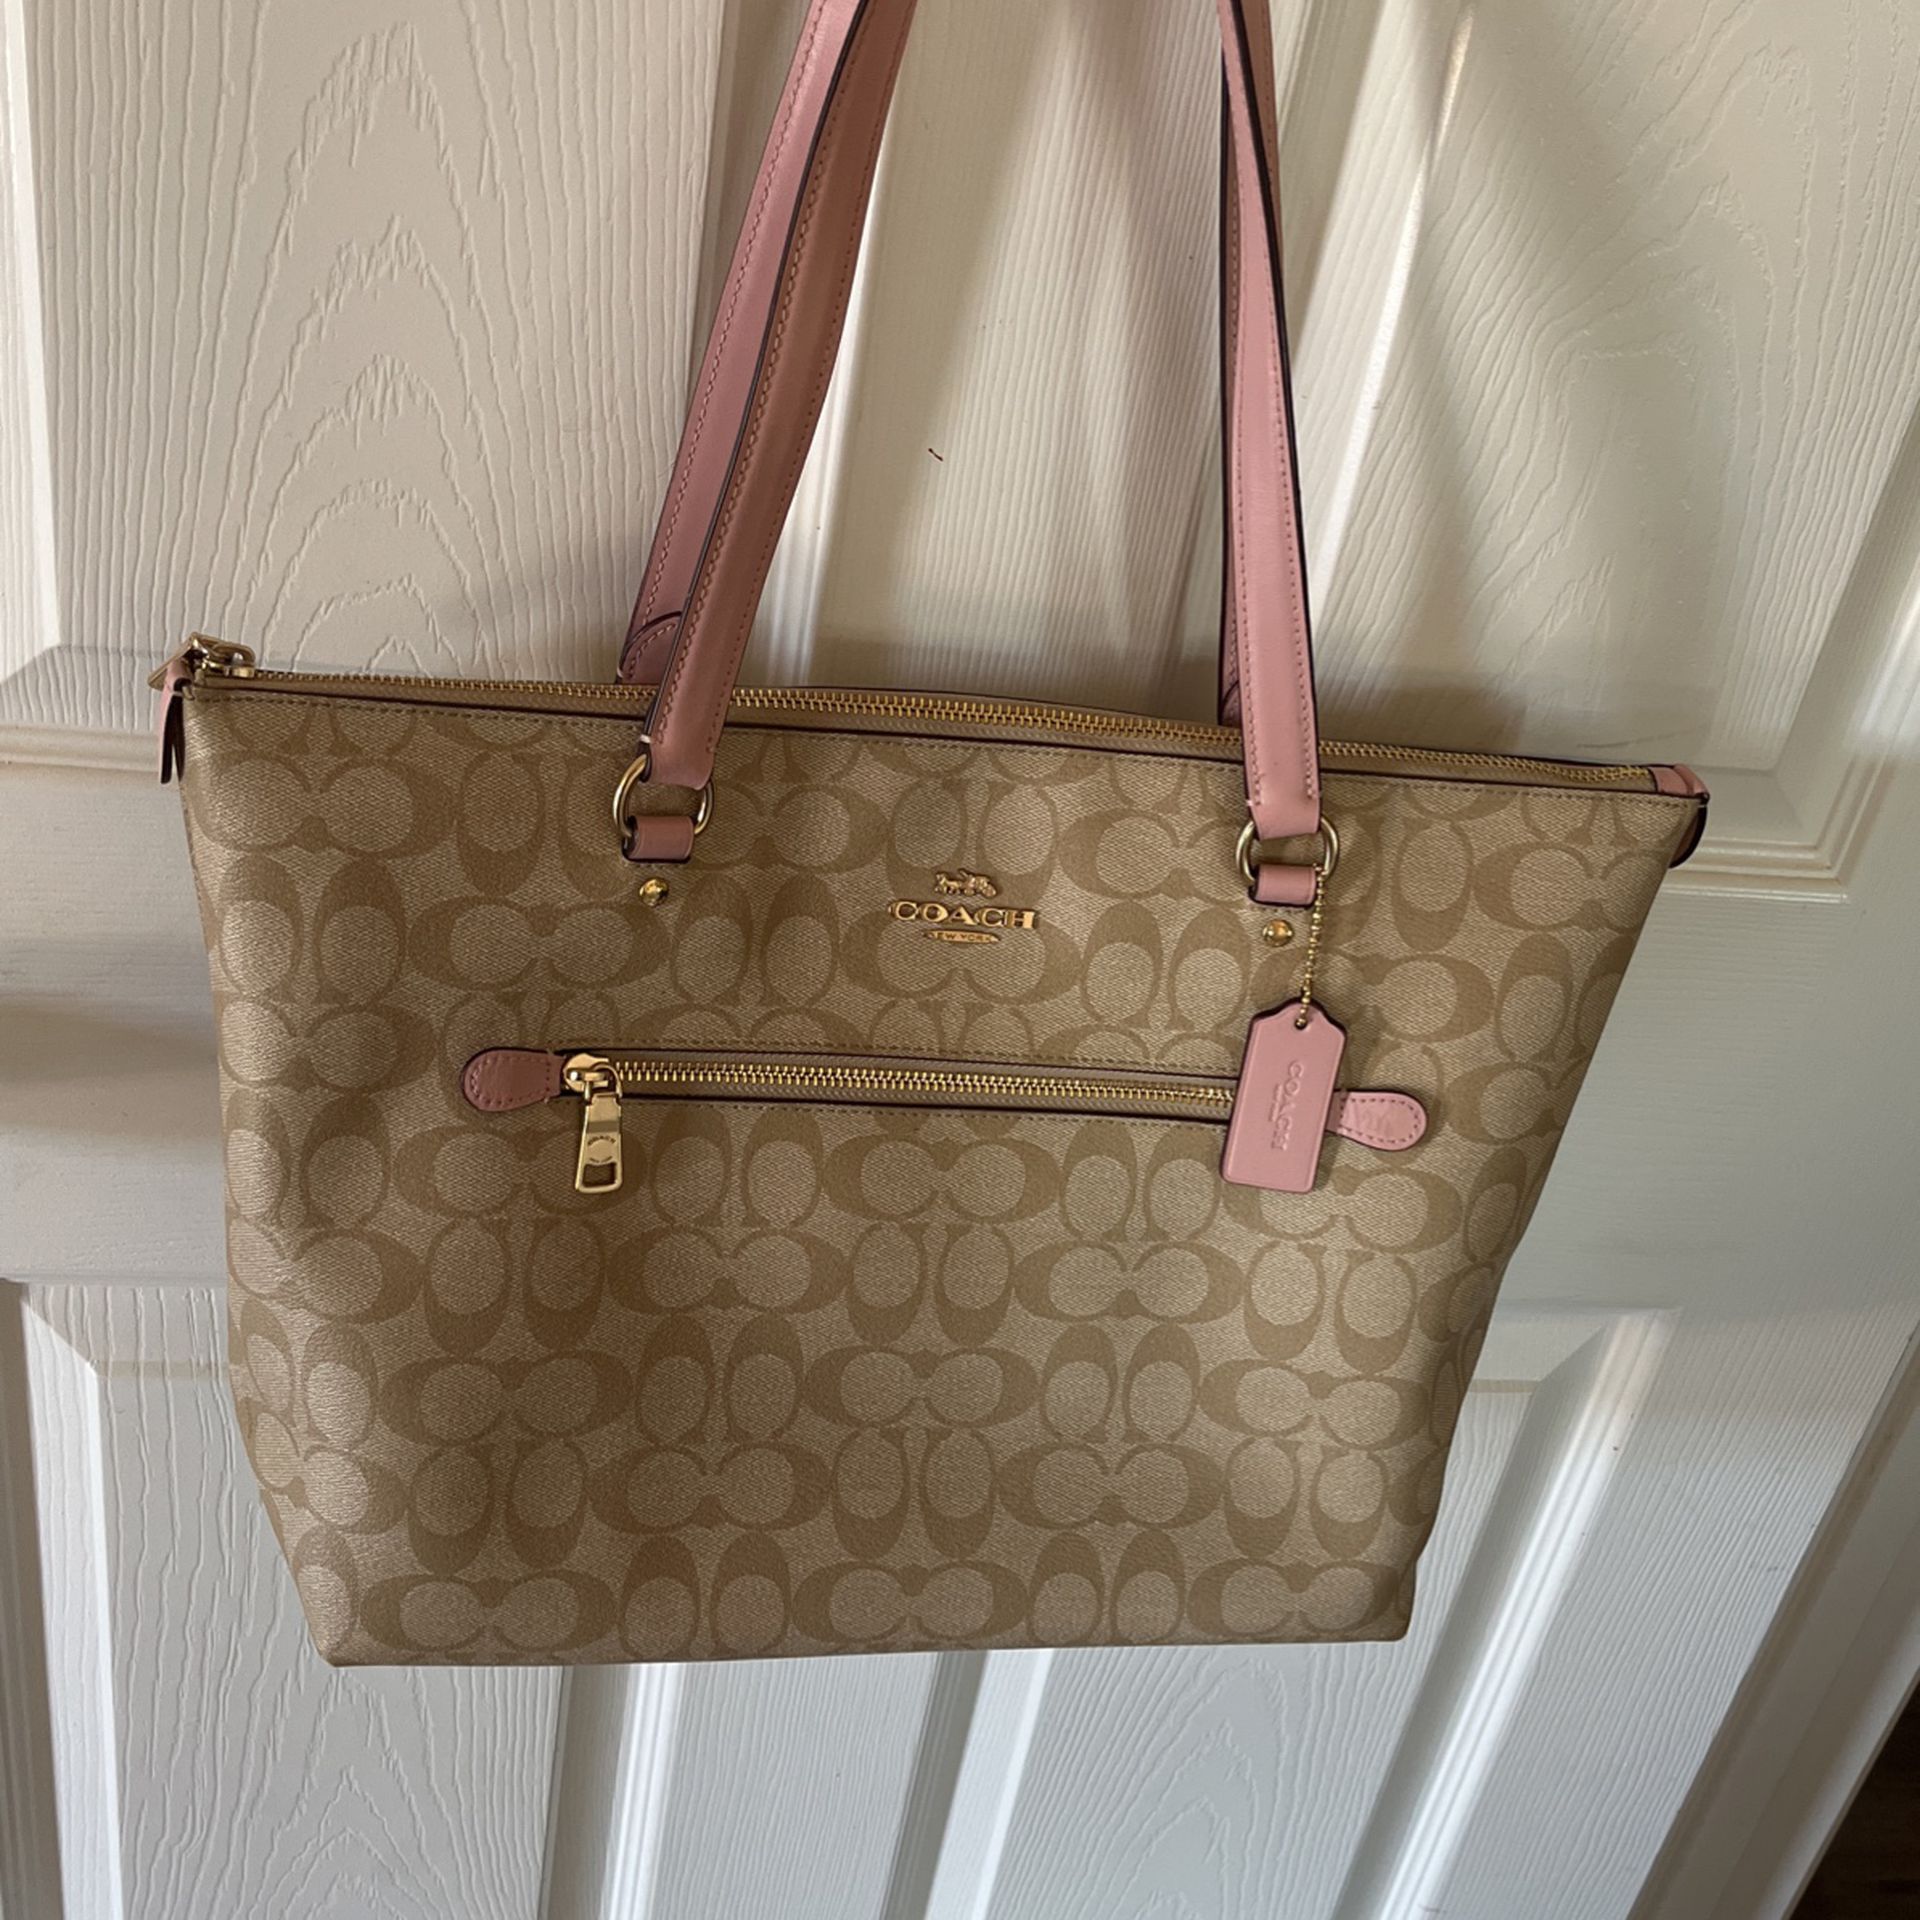 Authentic Tan & Pink Coach Bag for Sale in Berenda, CA - OfferUp